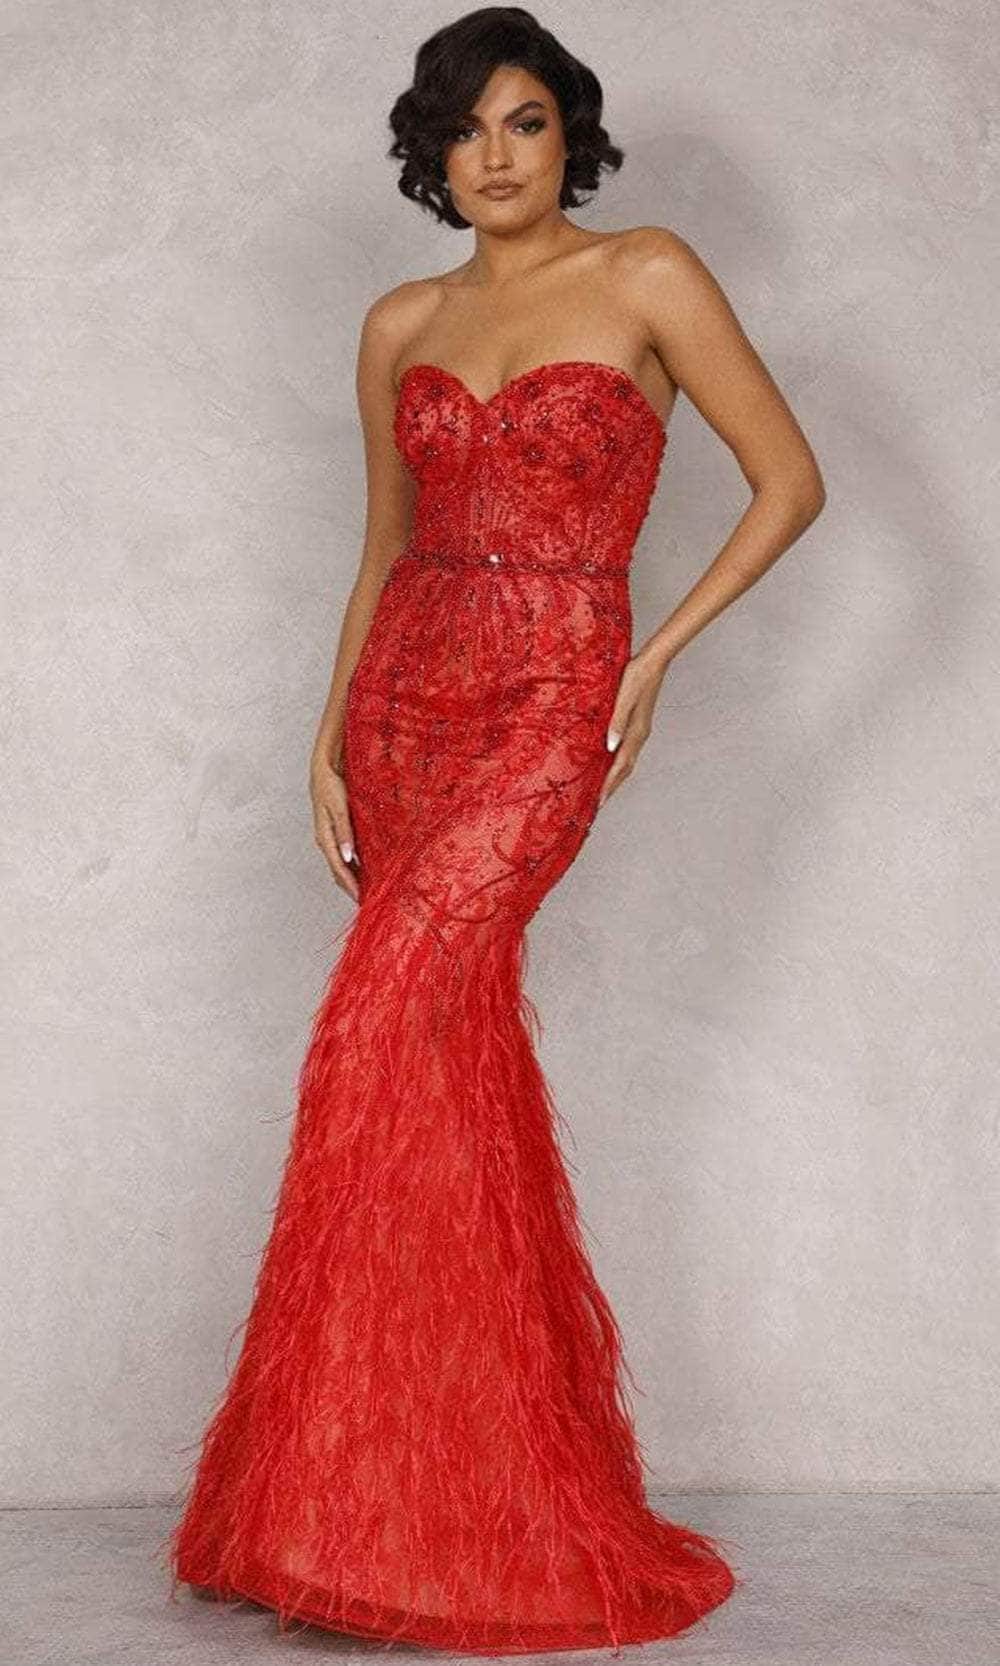 Terani Couture 2221GL0414 - Strapless Feather Trumpet Evening Dress
